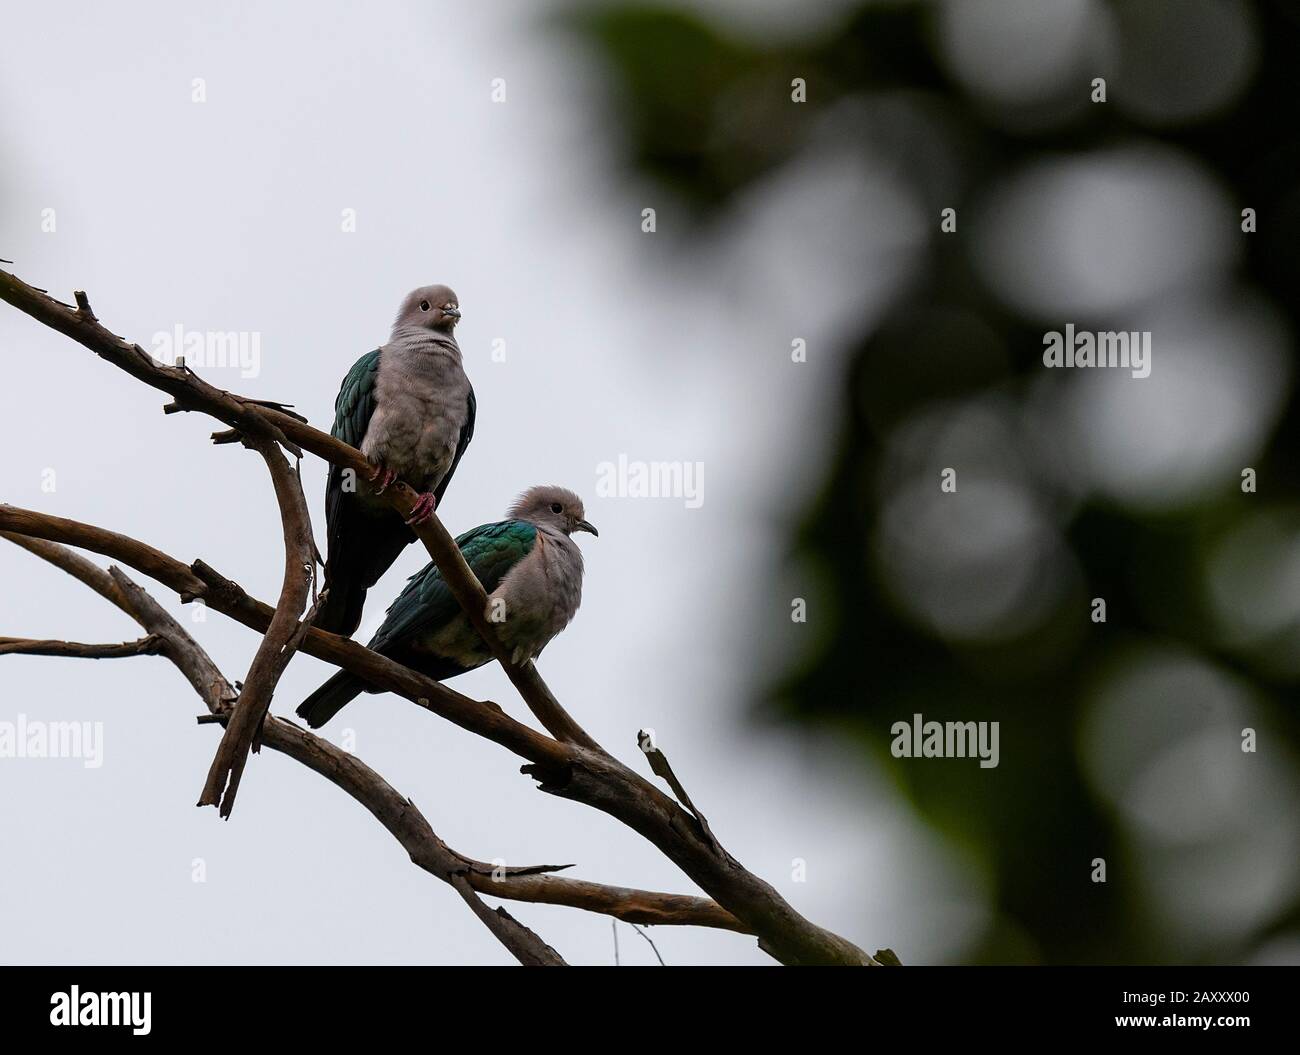 The Green Imperial-Pigeon is an arboreal species, on a tree branch on blur bokeh background. Pigeon Bird Concept. Stock Photo